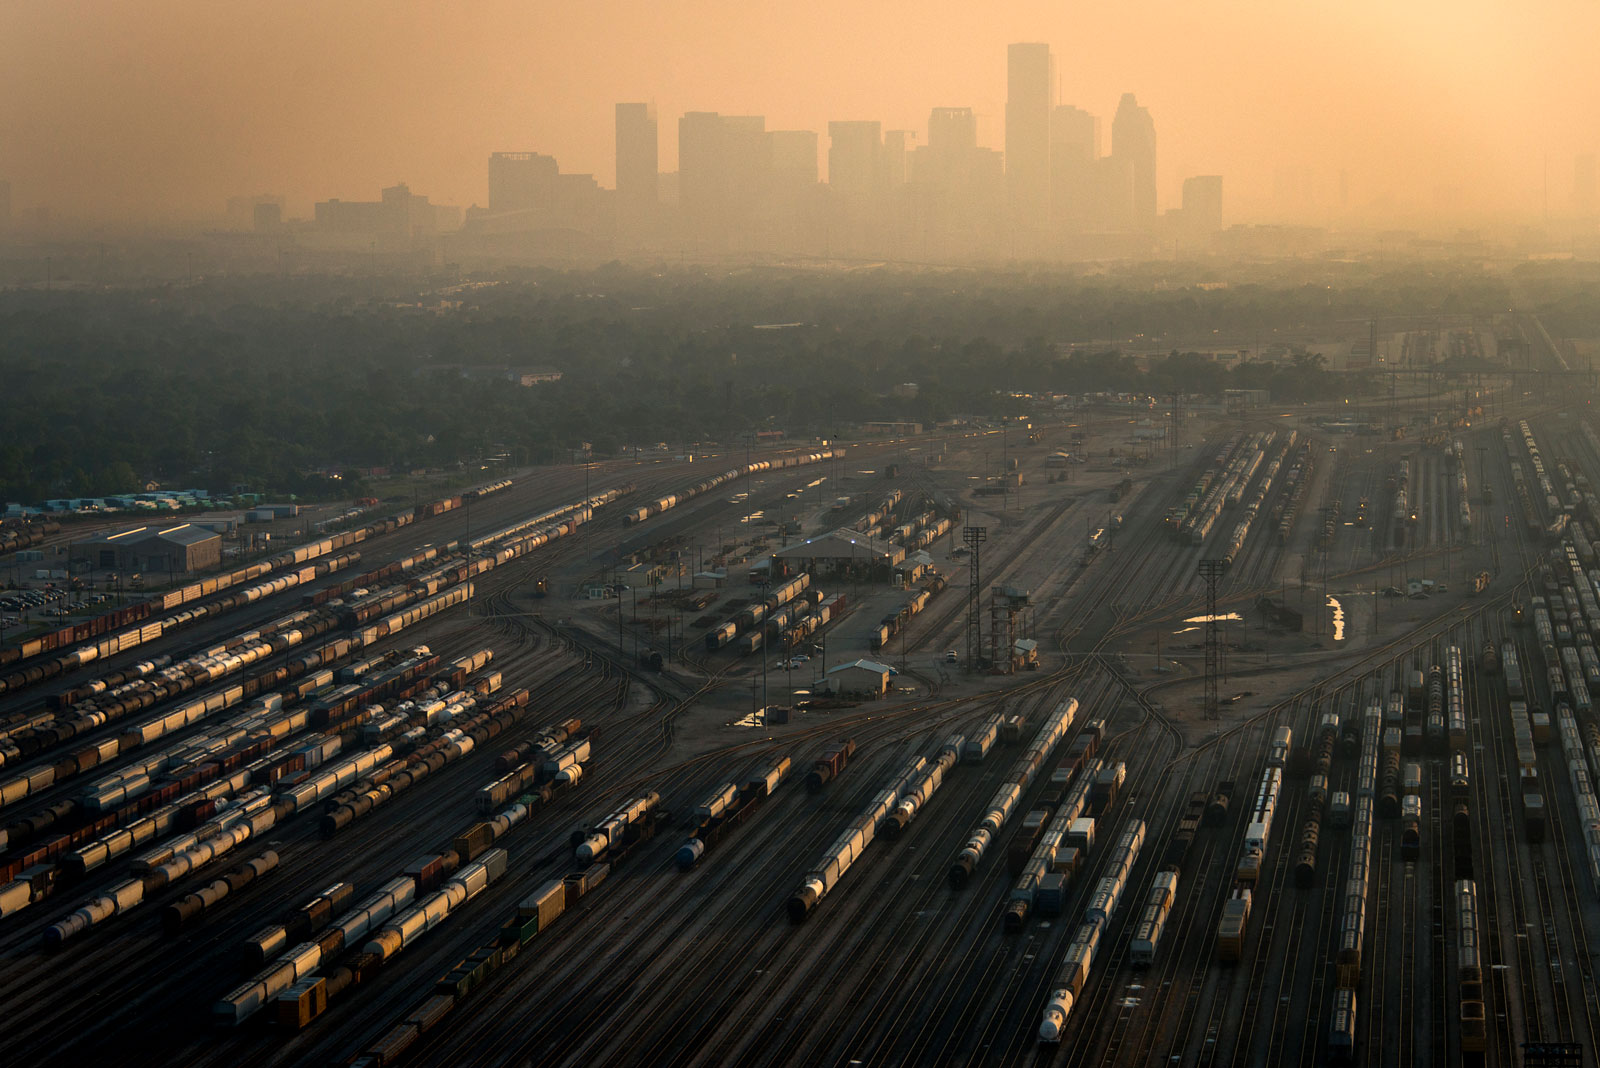 An aerial view of a rail yard with the Houston skyline in the distance